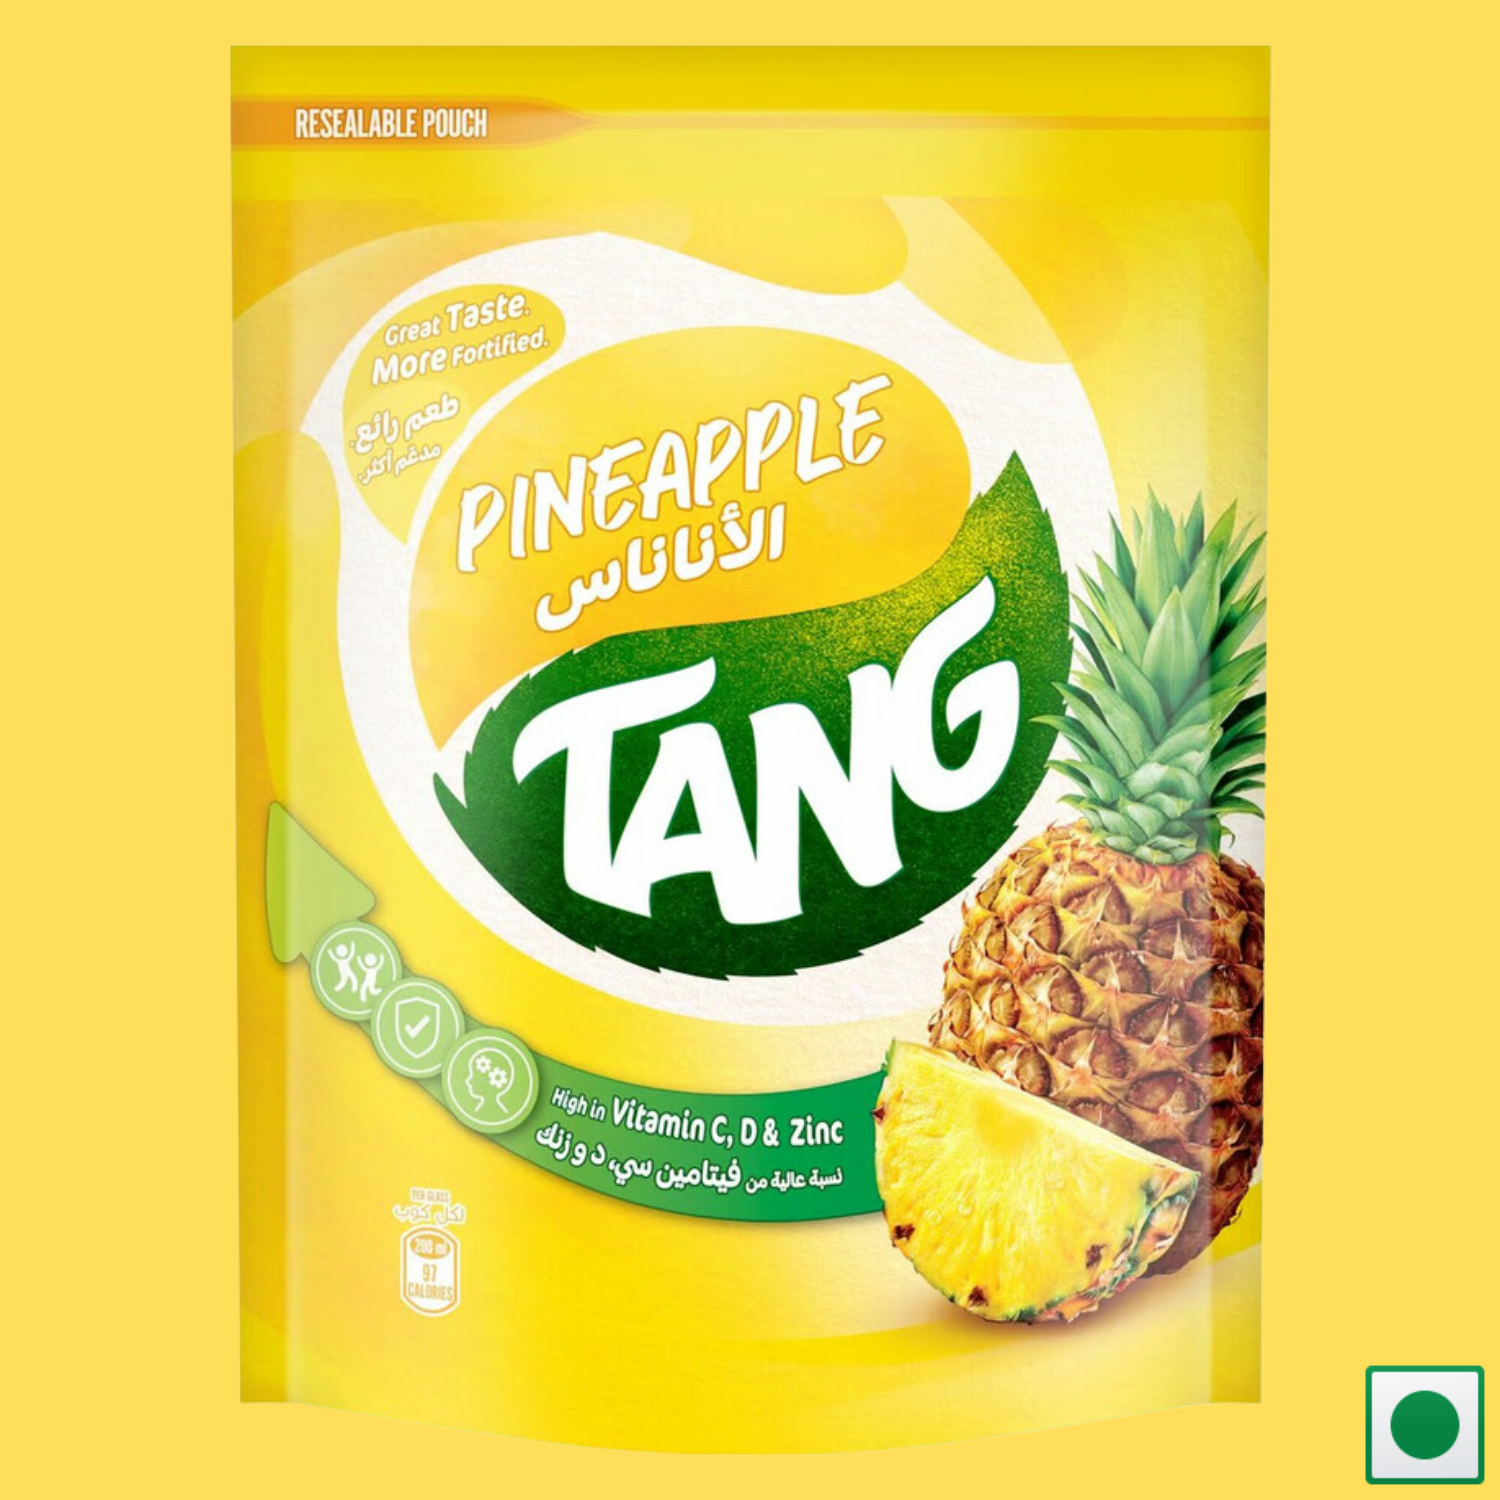 Tang Pineapple Instant Powdered Drink, 375g (Imported)